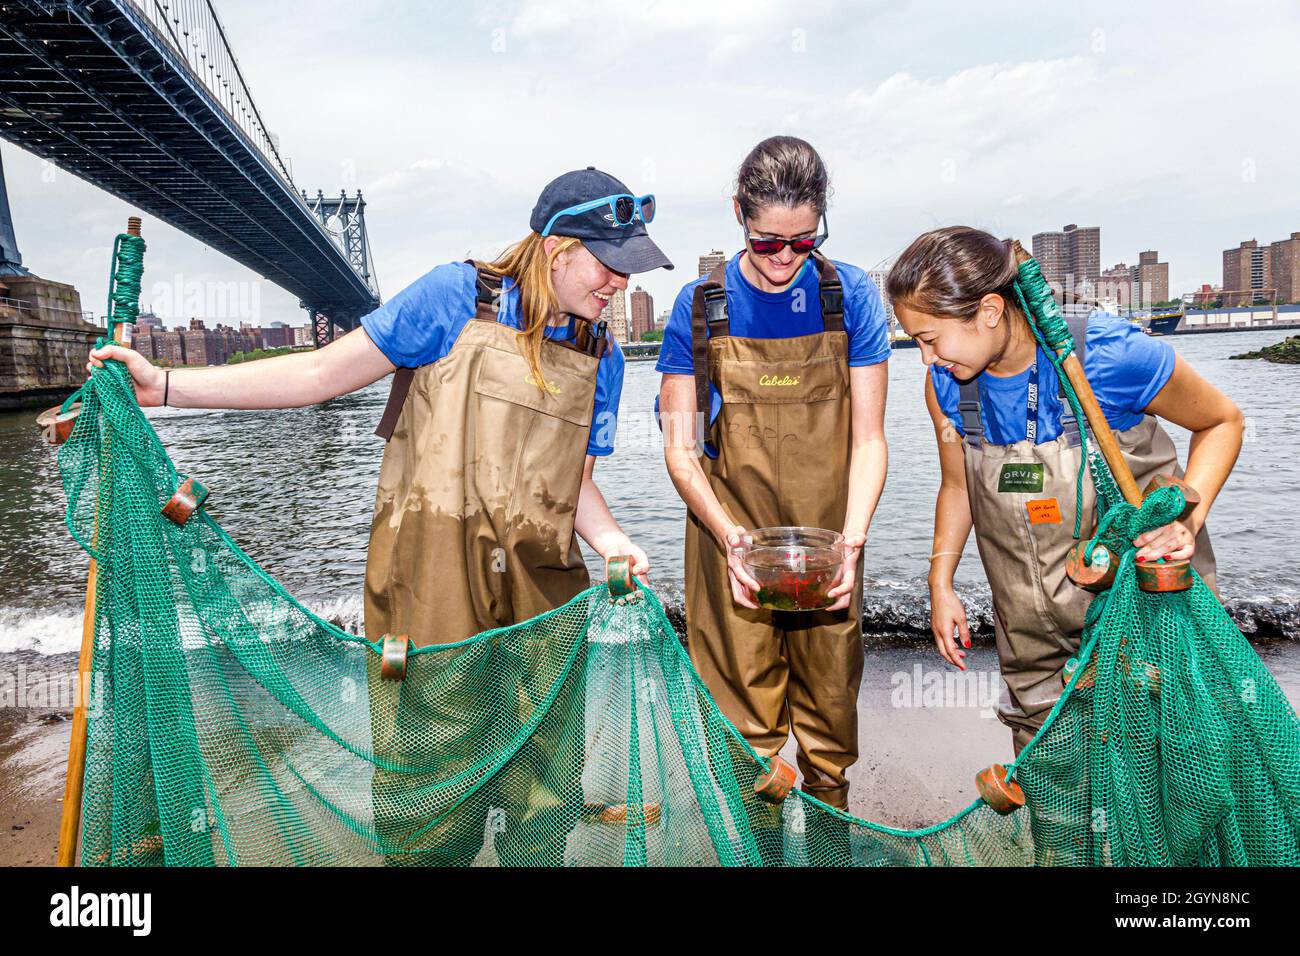 New York City,East River Brooklyn Bridge Park Conservancy,using seine net collecting samples,Asian girl teen student wading overalls naturalists Stock Photo